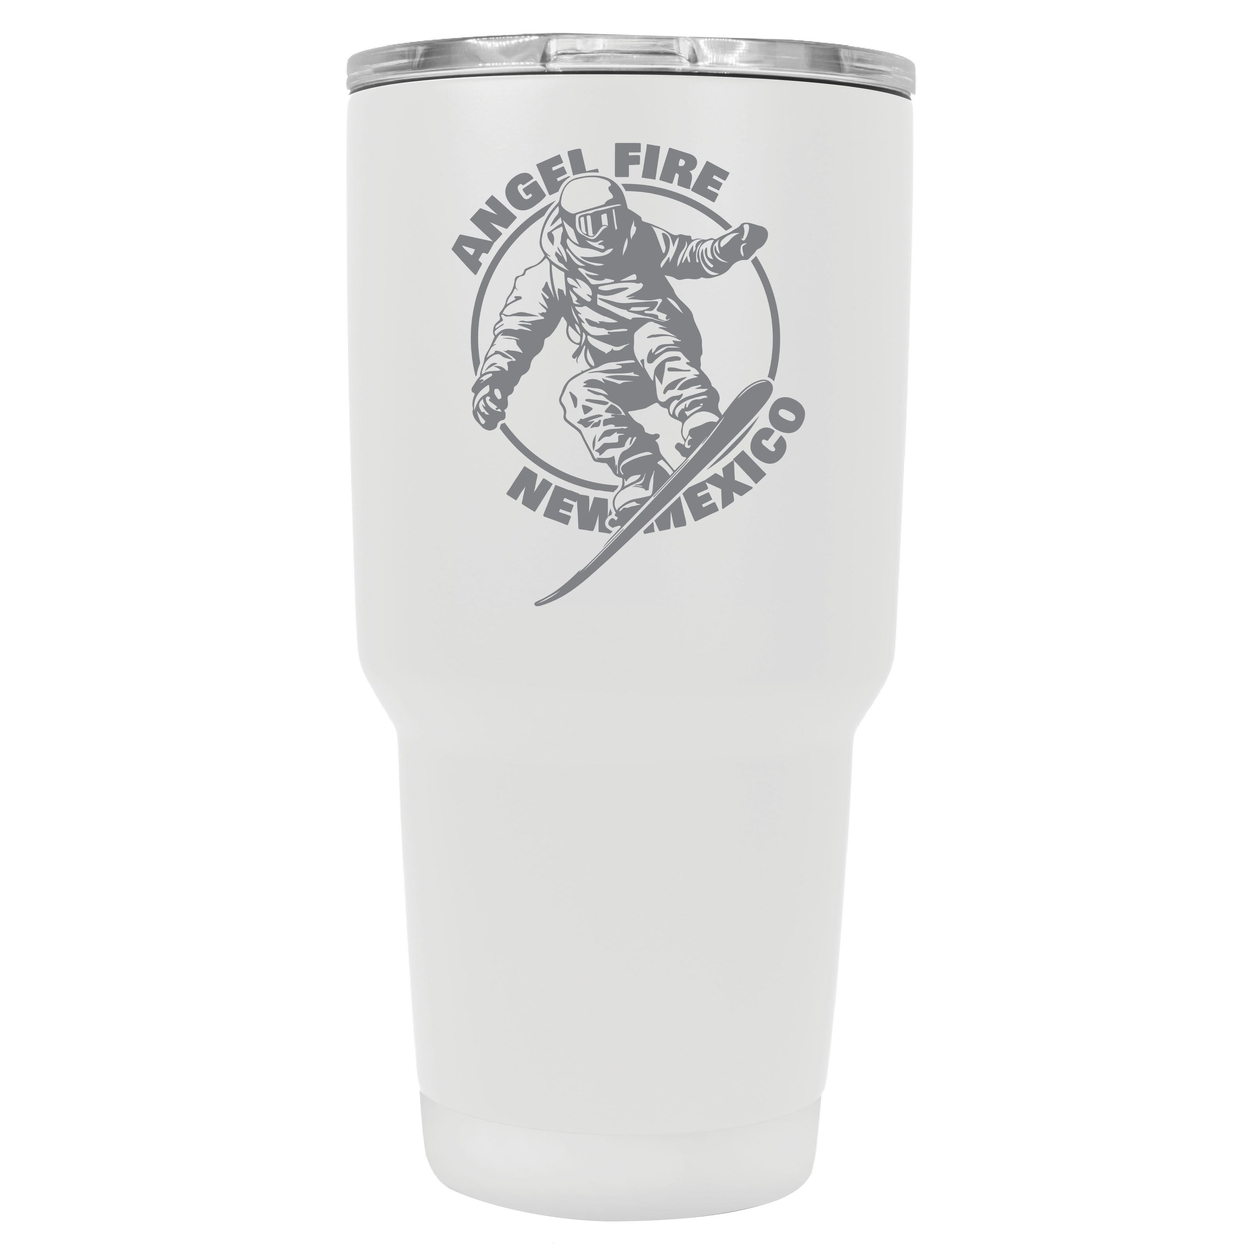 Angel Fire New Mexico Souvenir 24 Oz Engraved Insulated Stainless Steel Tumbler - Coral,,2-Pack